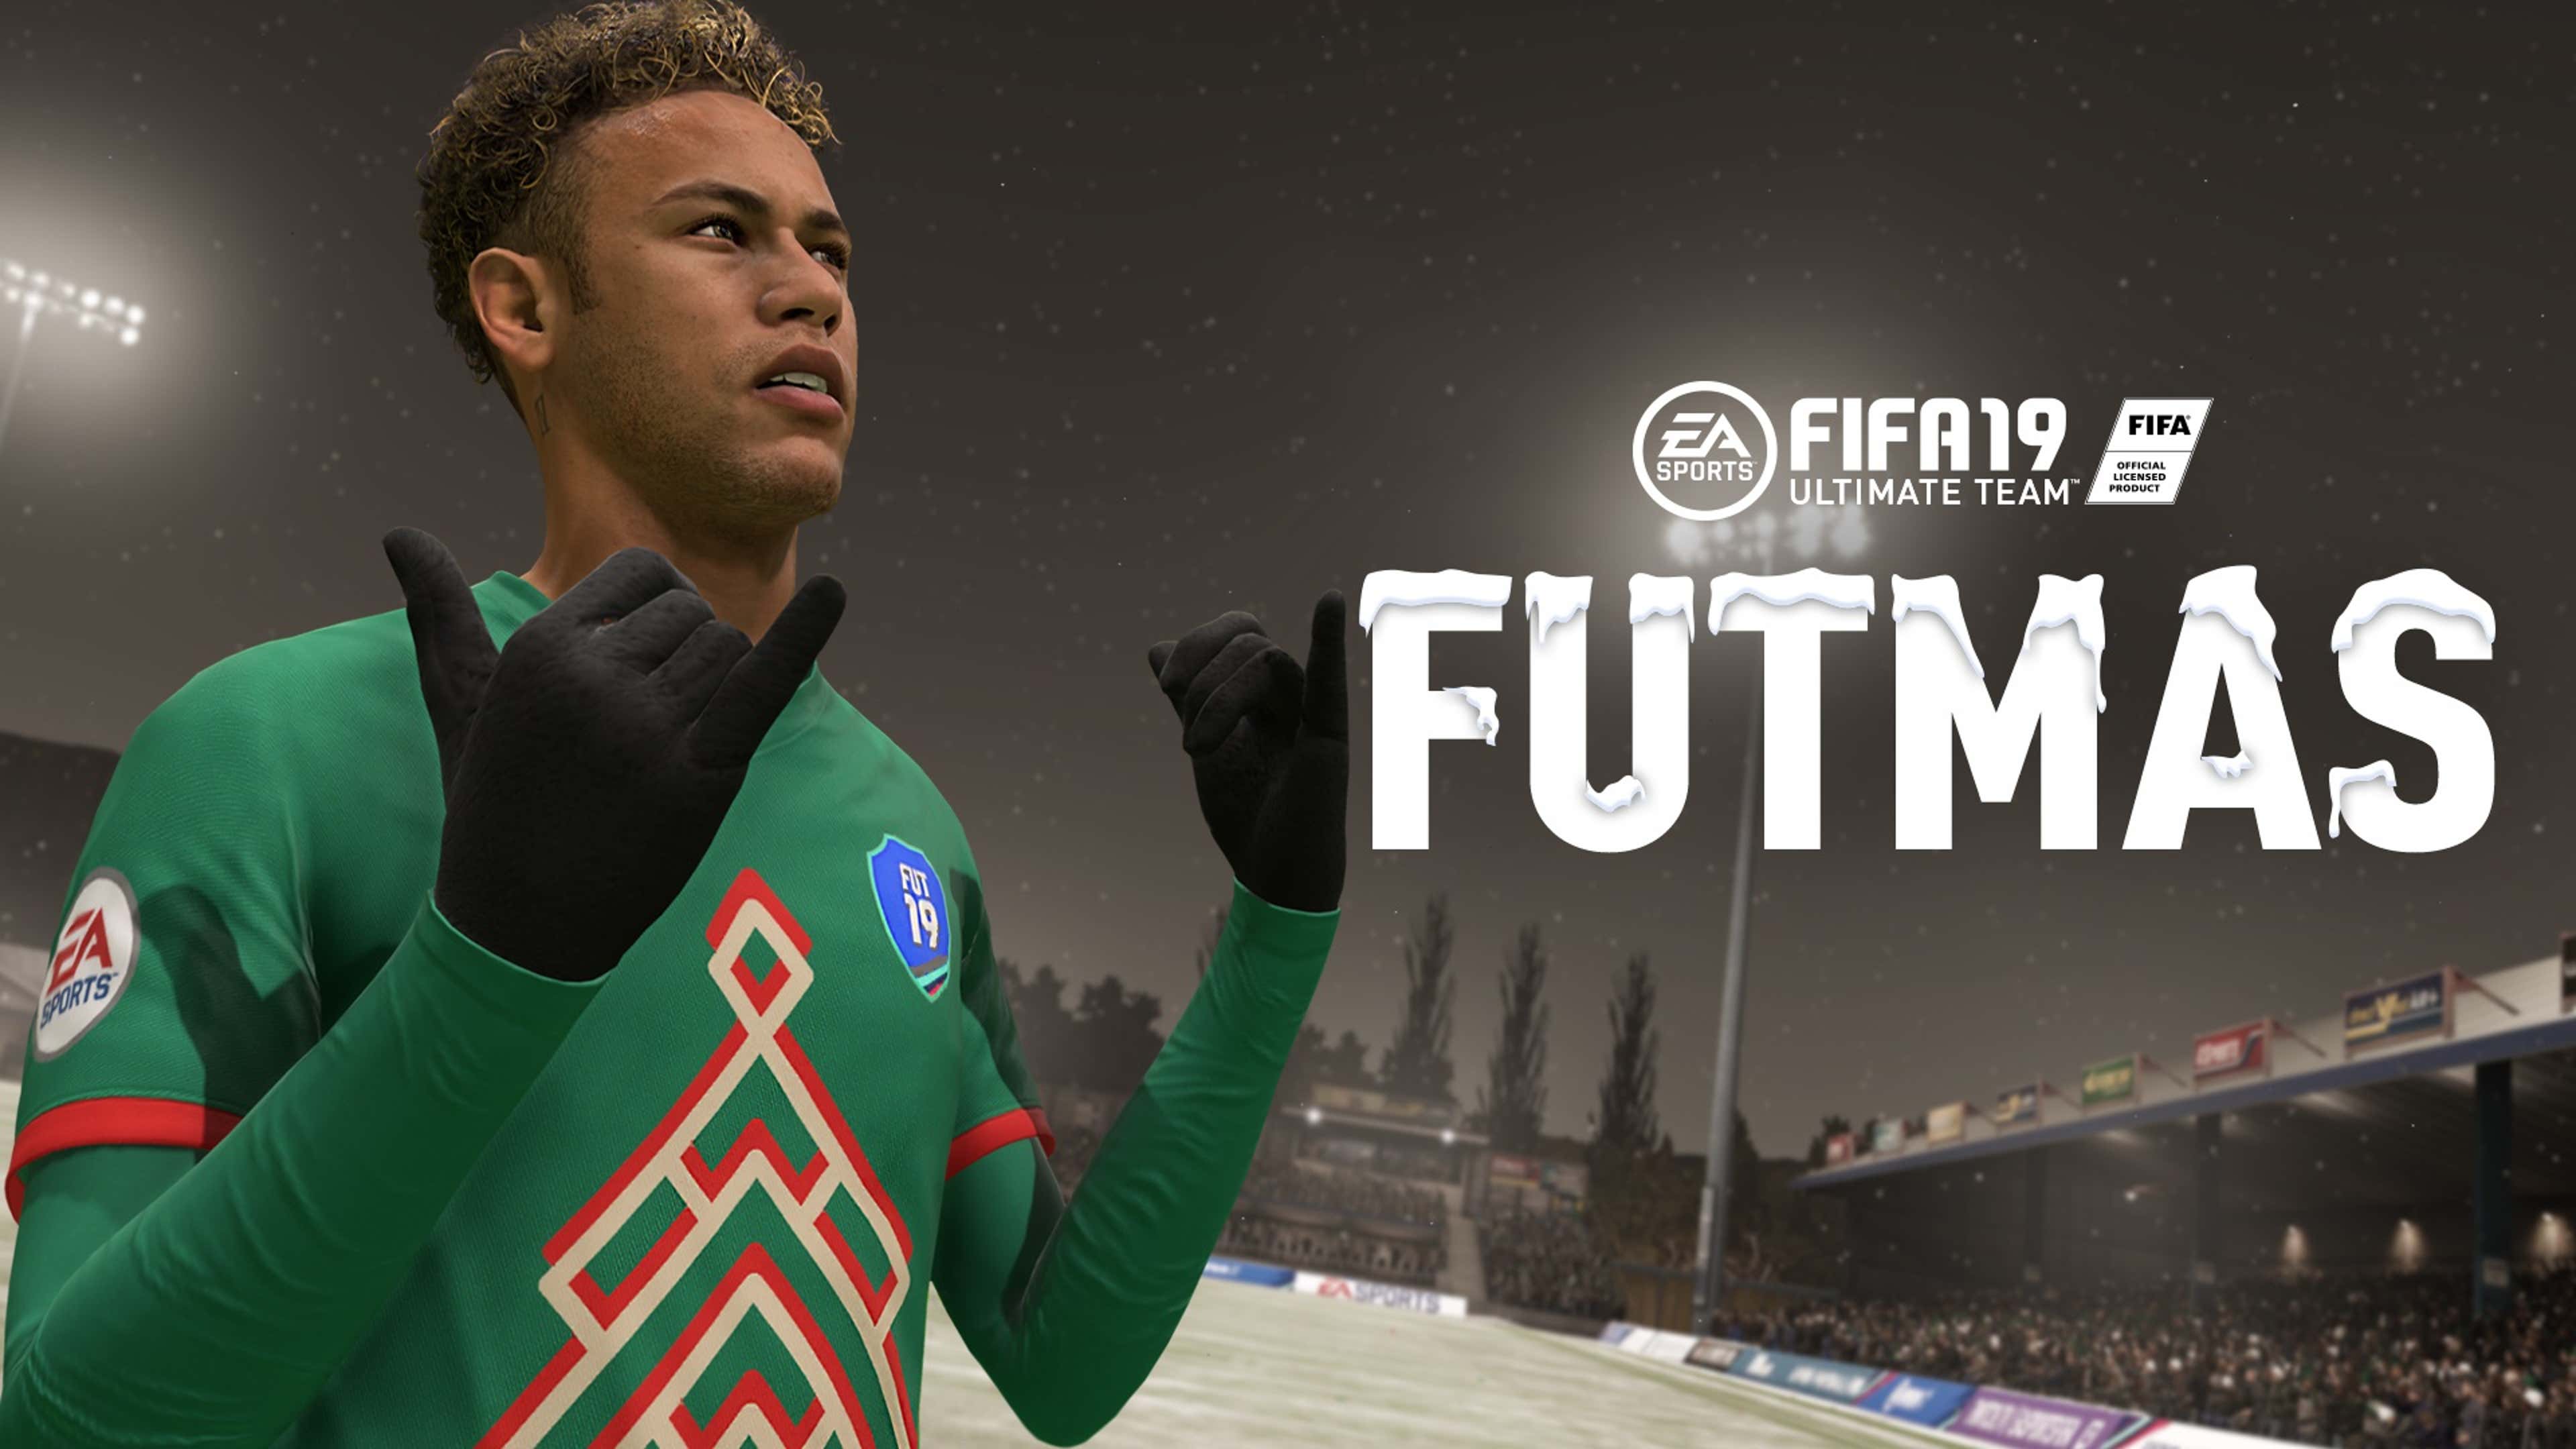 FIFA 19 Web App EA Website NOW LIVE: FUT Ultimate Team Web Start Early  Access News - Daily Star